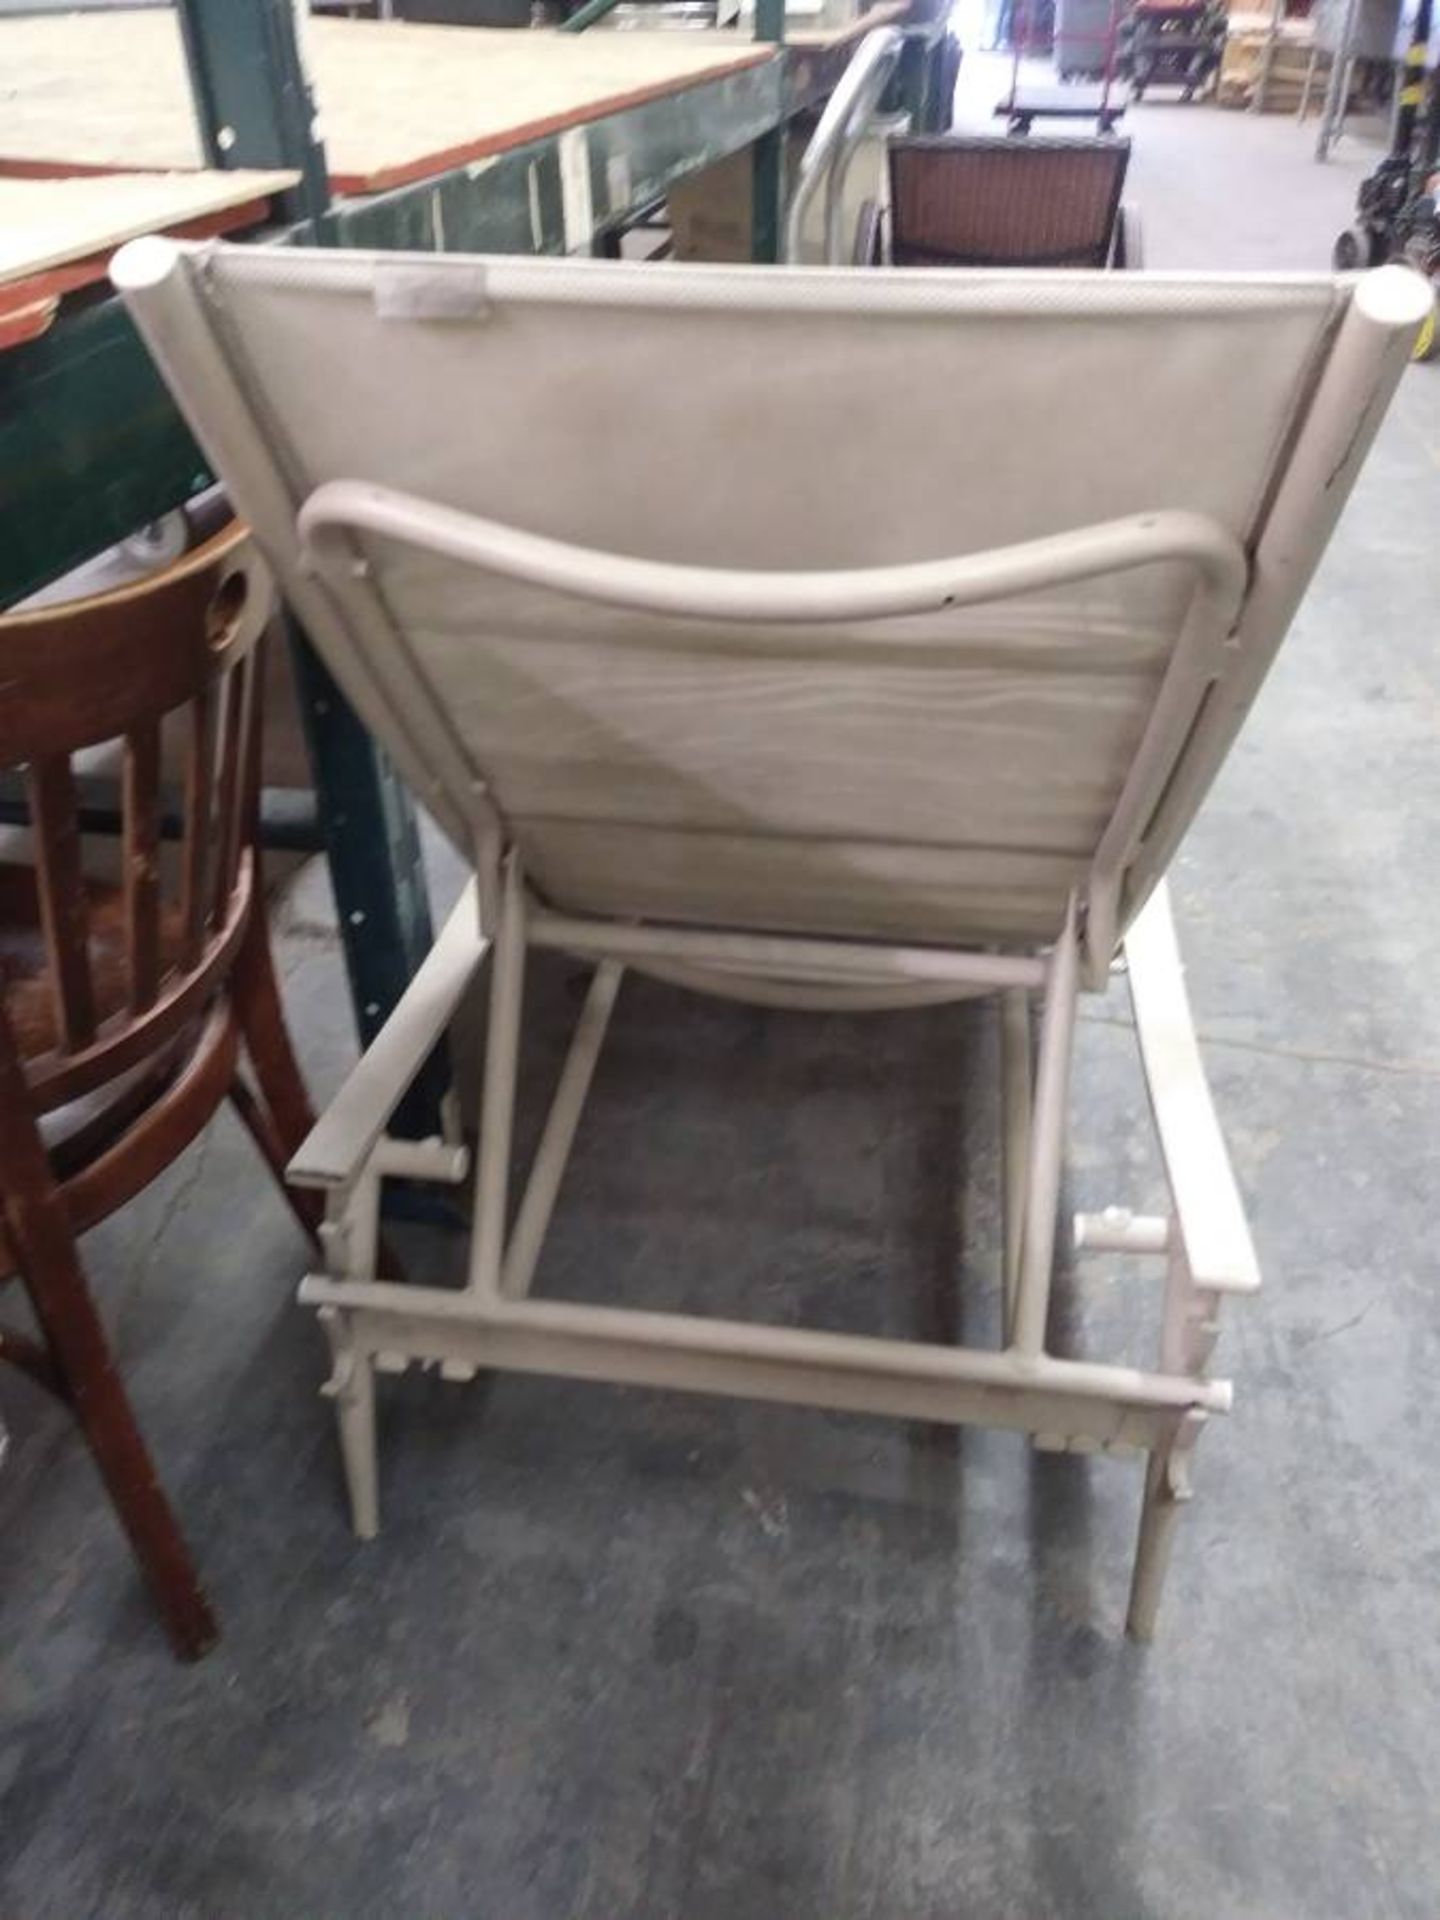 TAN PATIO LAWN CHAIRS - ADJUSTABLE (METAL FRAME) (QTY X MONEY) - Image 2 of 5